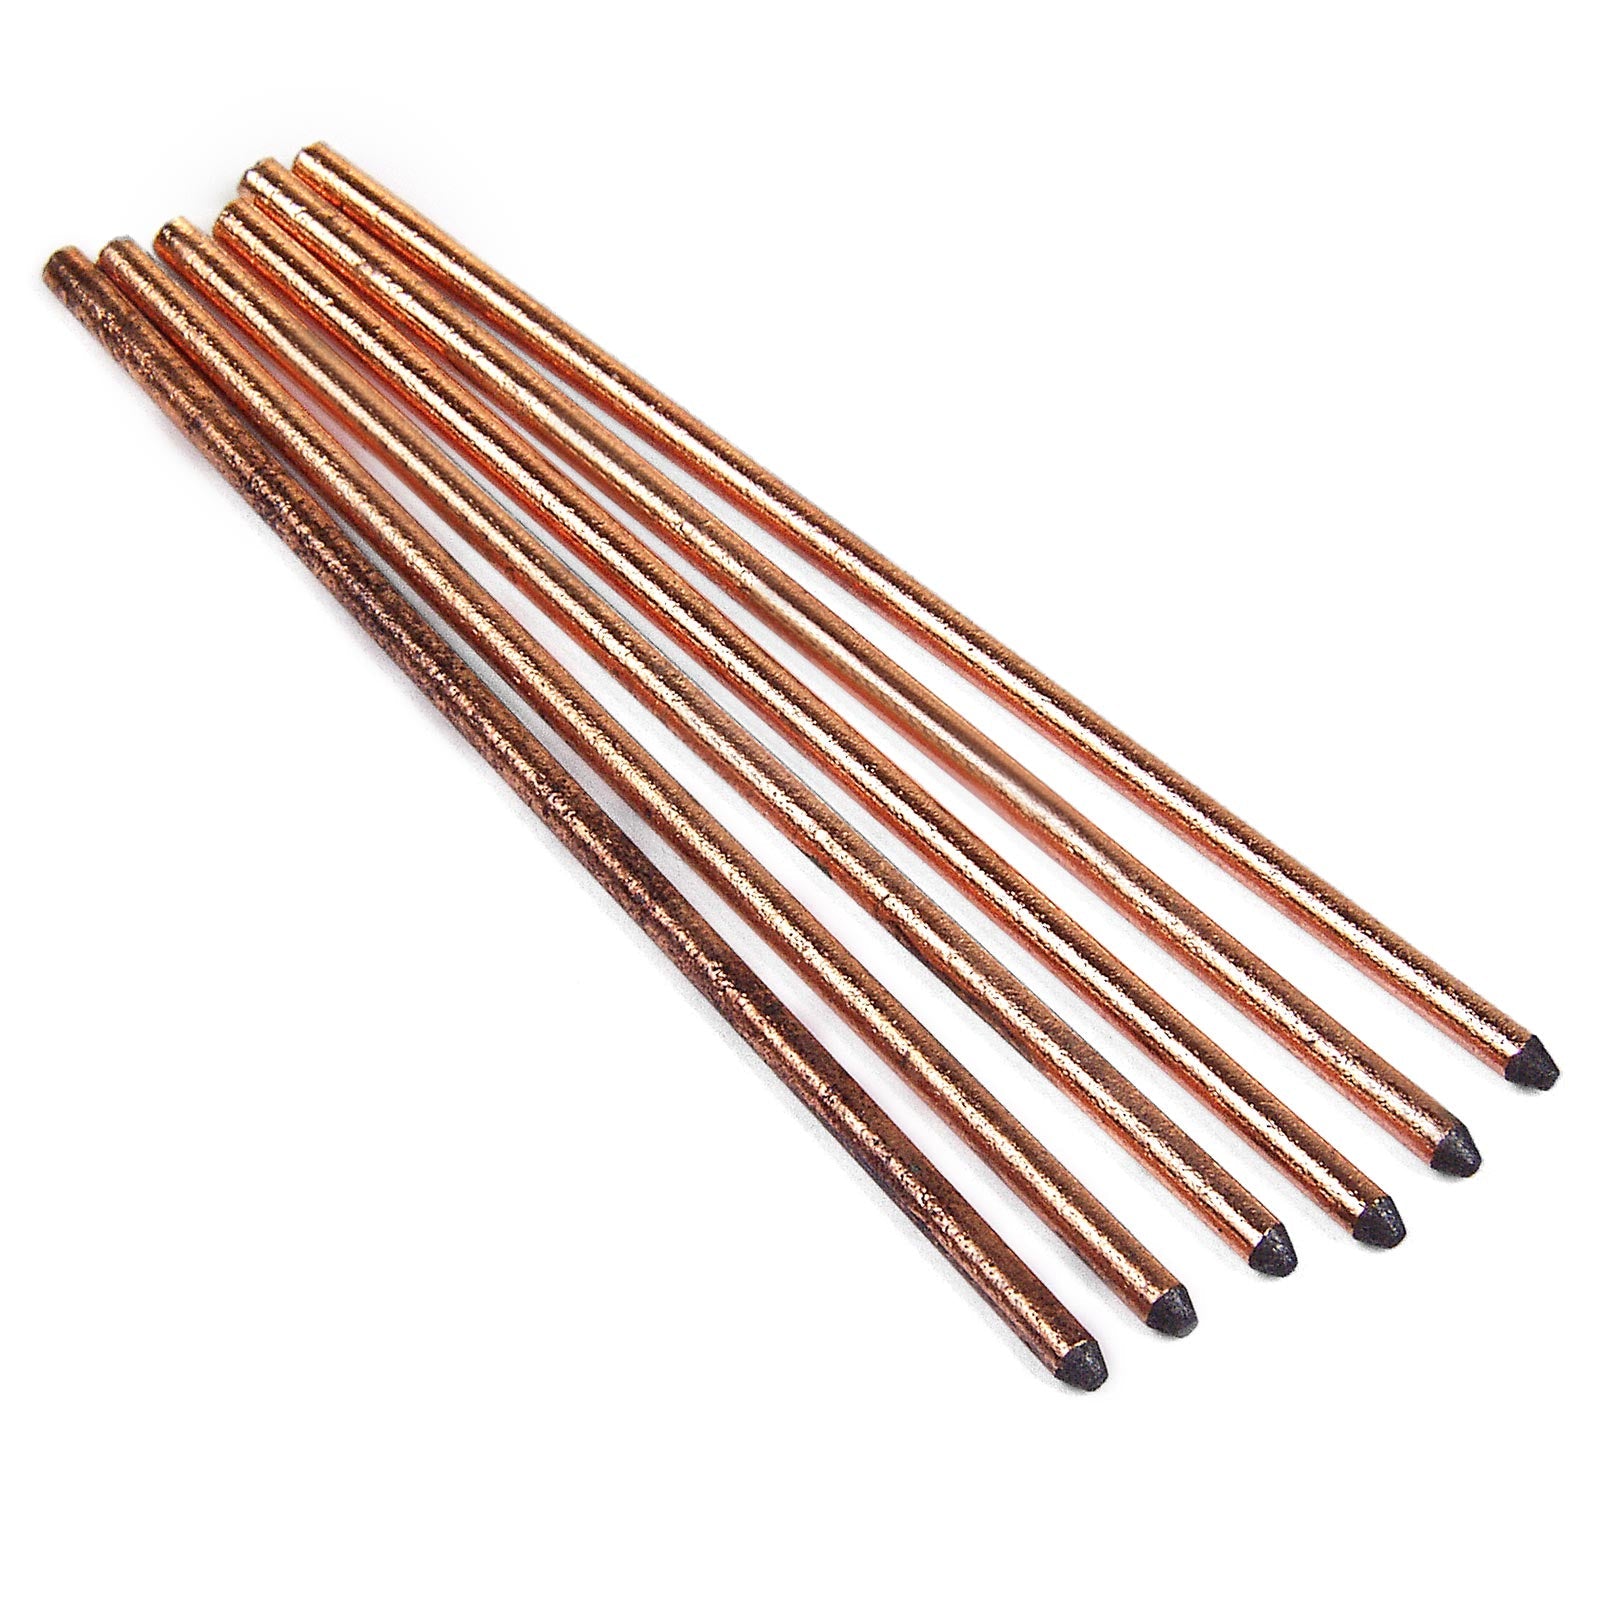 Electrodes for Single Electrode Handpiece , Set of 6 - Micro - Mark Soldering Iron Accessories